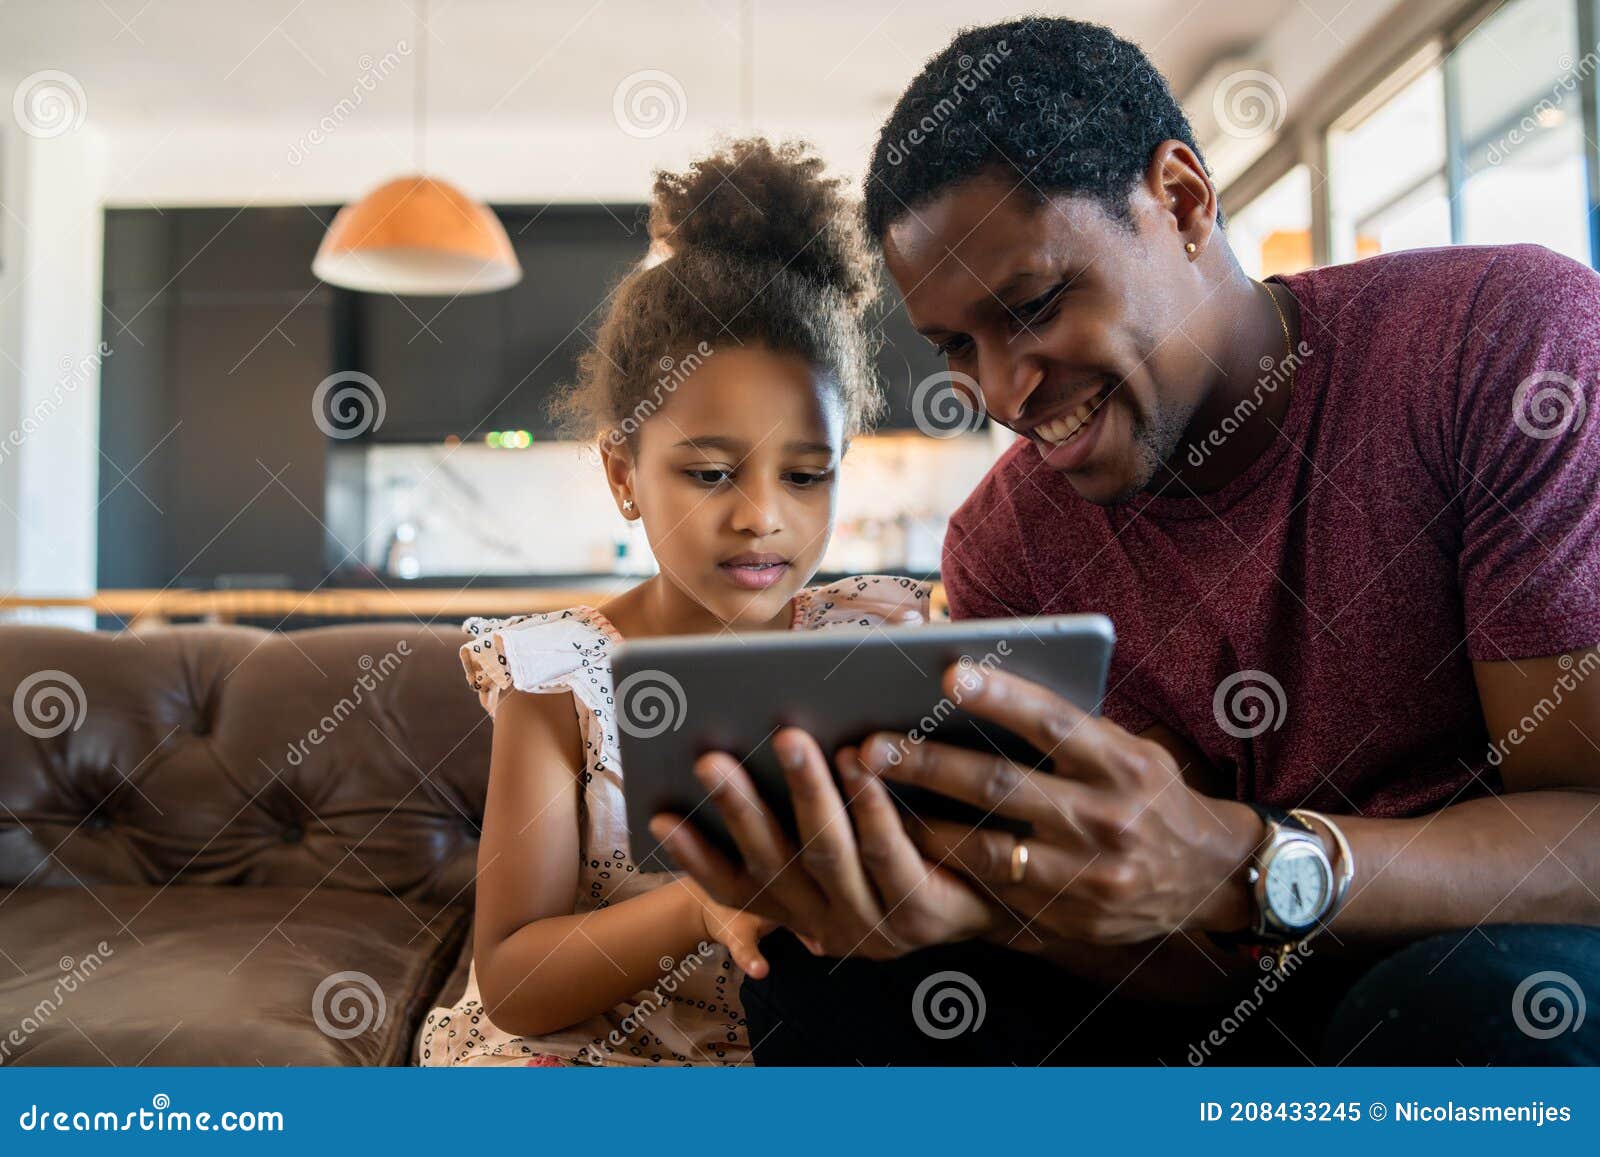 father and daughter using digital tablet at home.